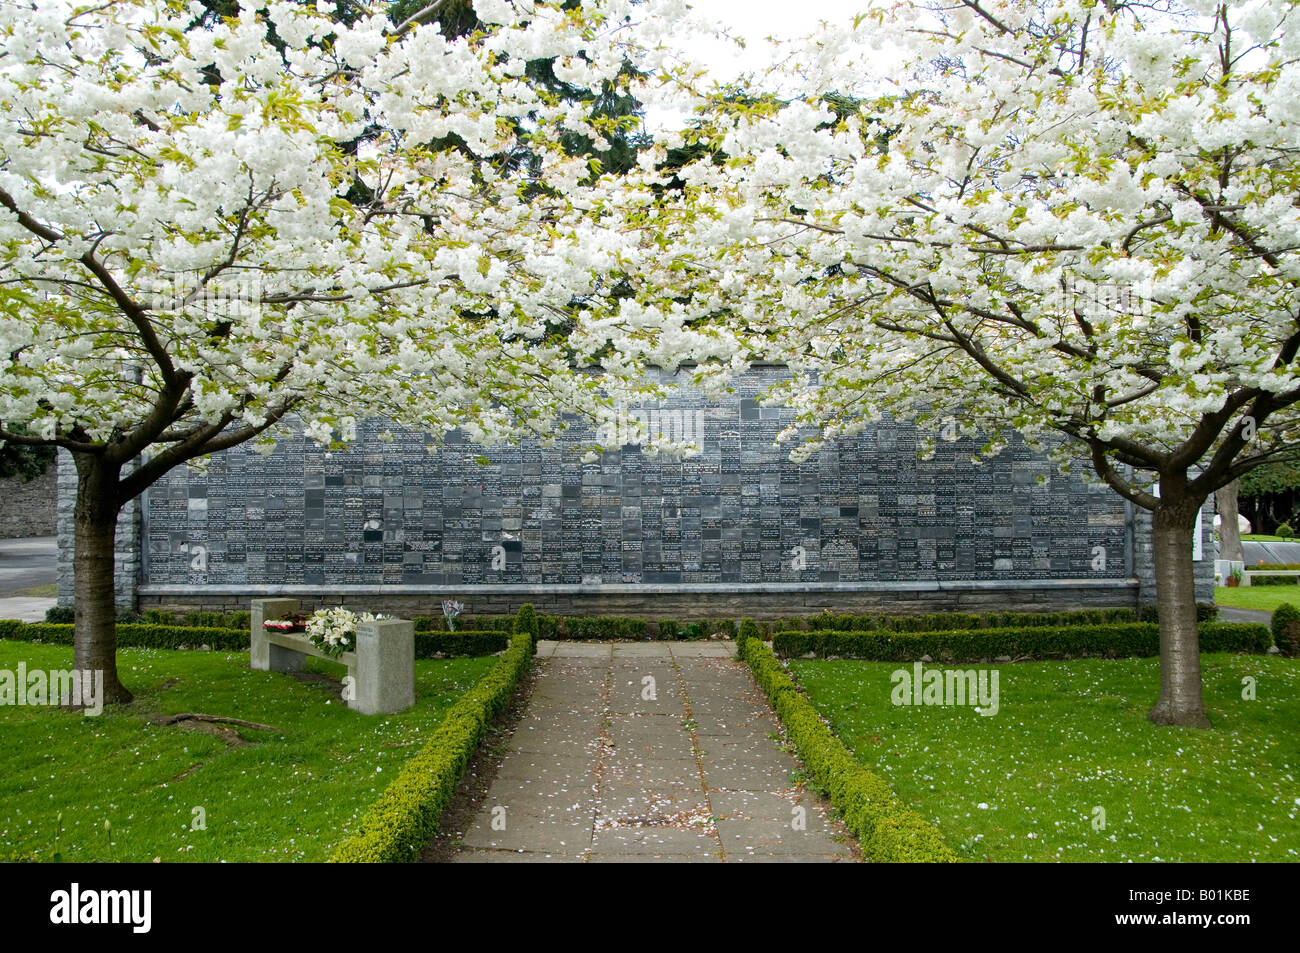 Two flowering trees in front of the columbarium wall at Glasnevin Cemetery Dublin Ireland Stock Photo